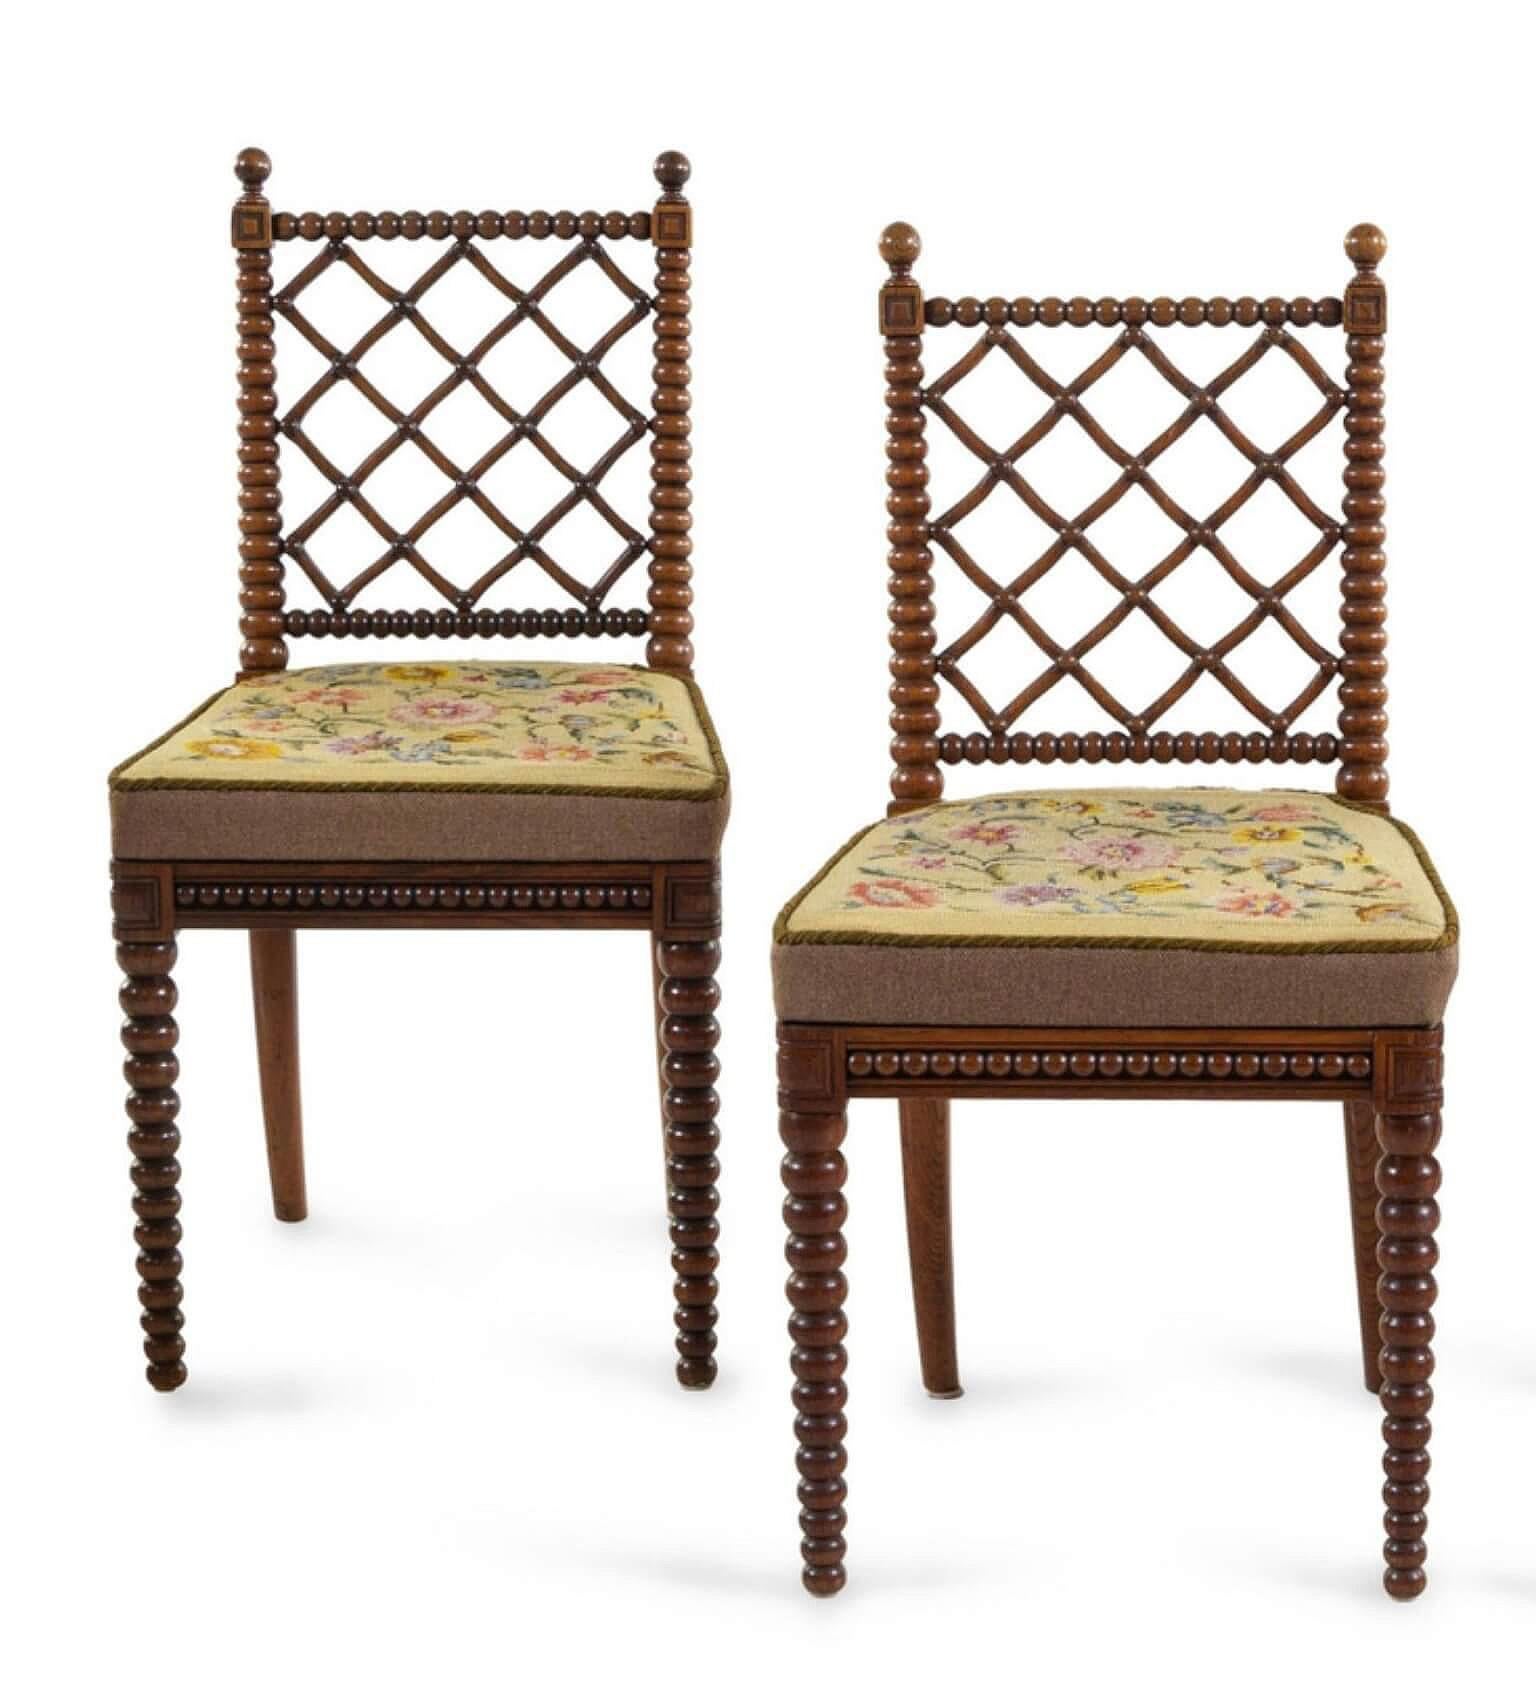 A wonderful and rare set of four English late Regency, circa 1825 side chairs attributed to legendary firm Gillows of Lancaster having bobbin turned solid pollard oak frames with rectangular 'lattice' backs and upholstered seats.